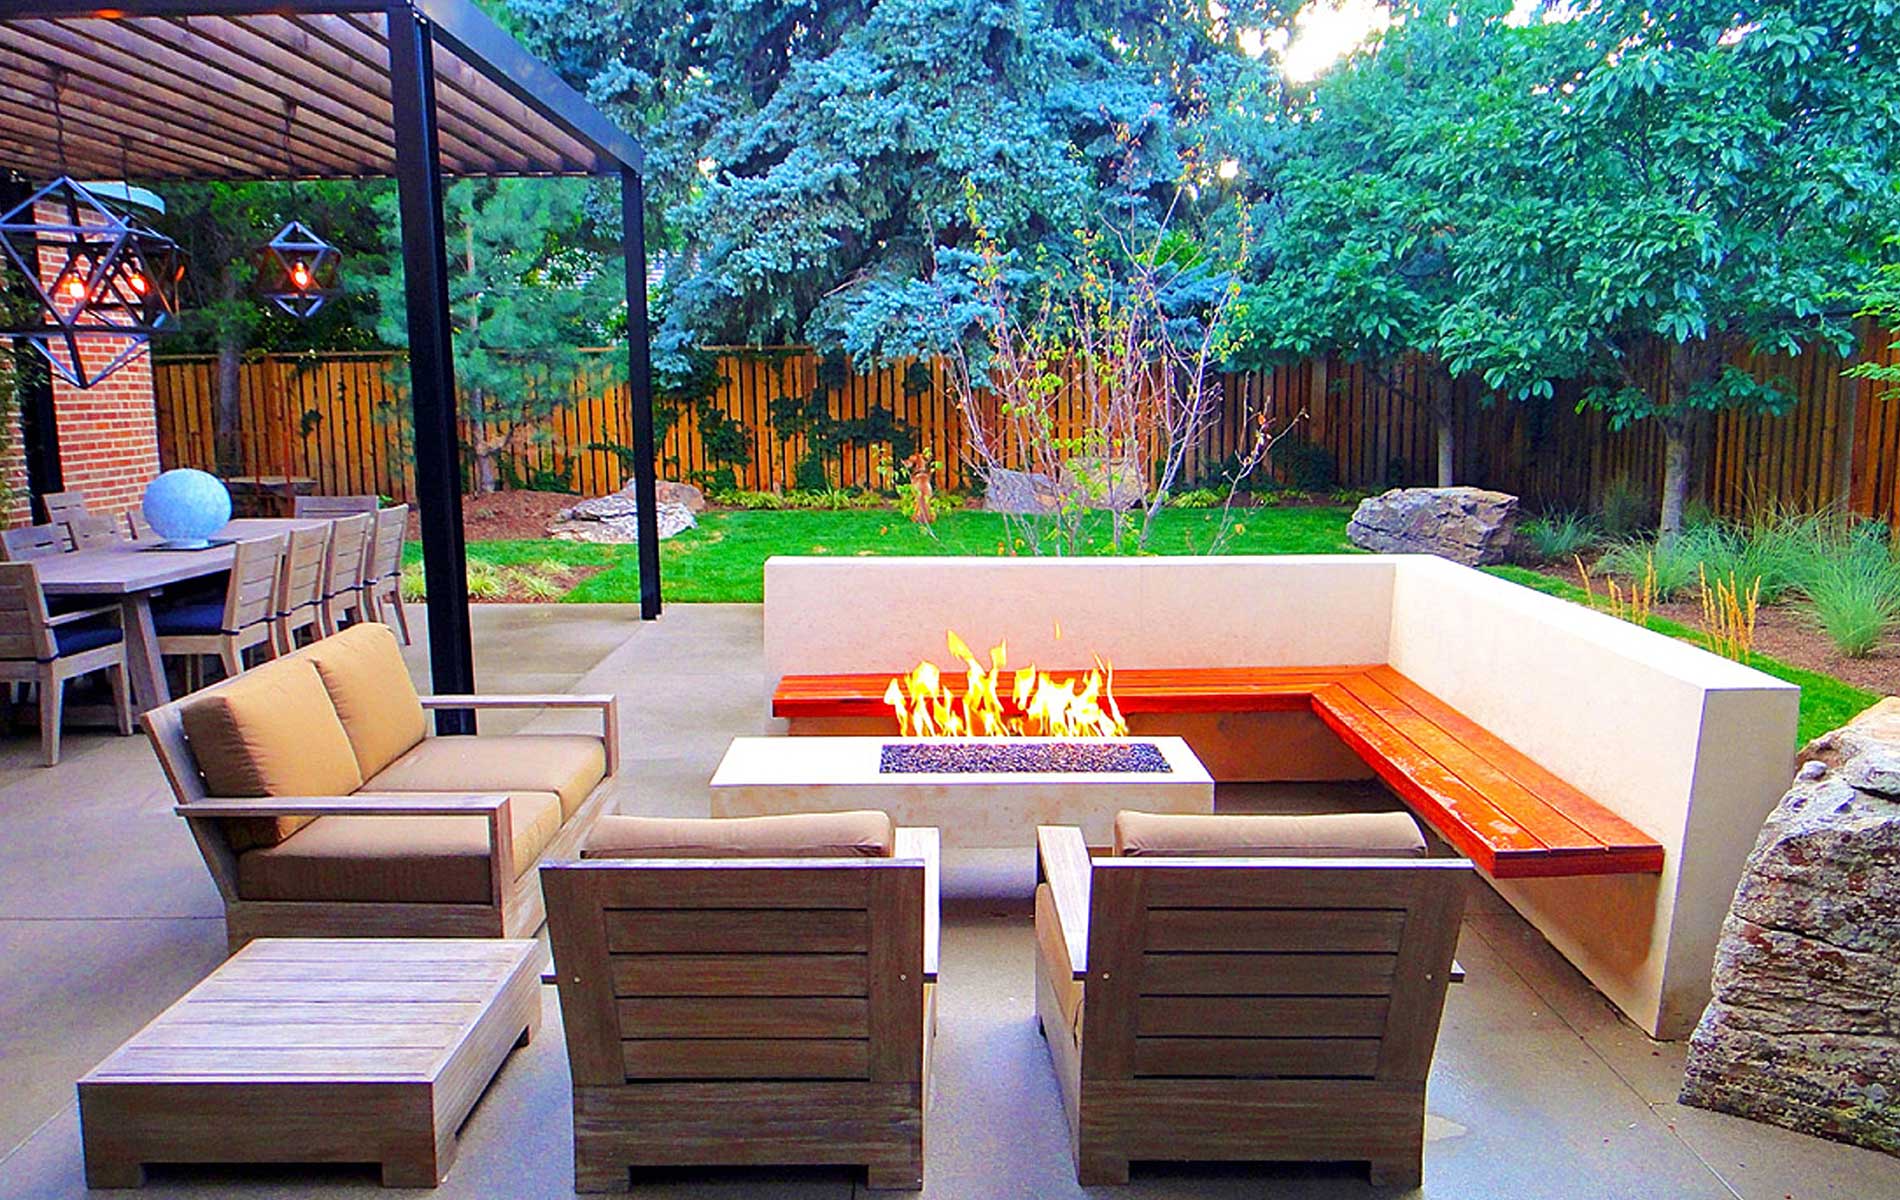 Create an outdoor living space that buyers can't resist.